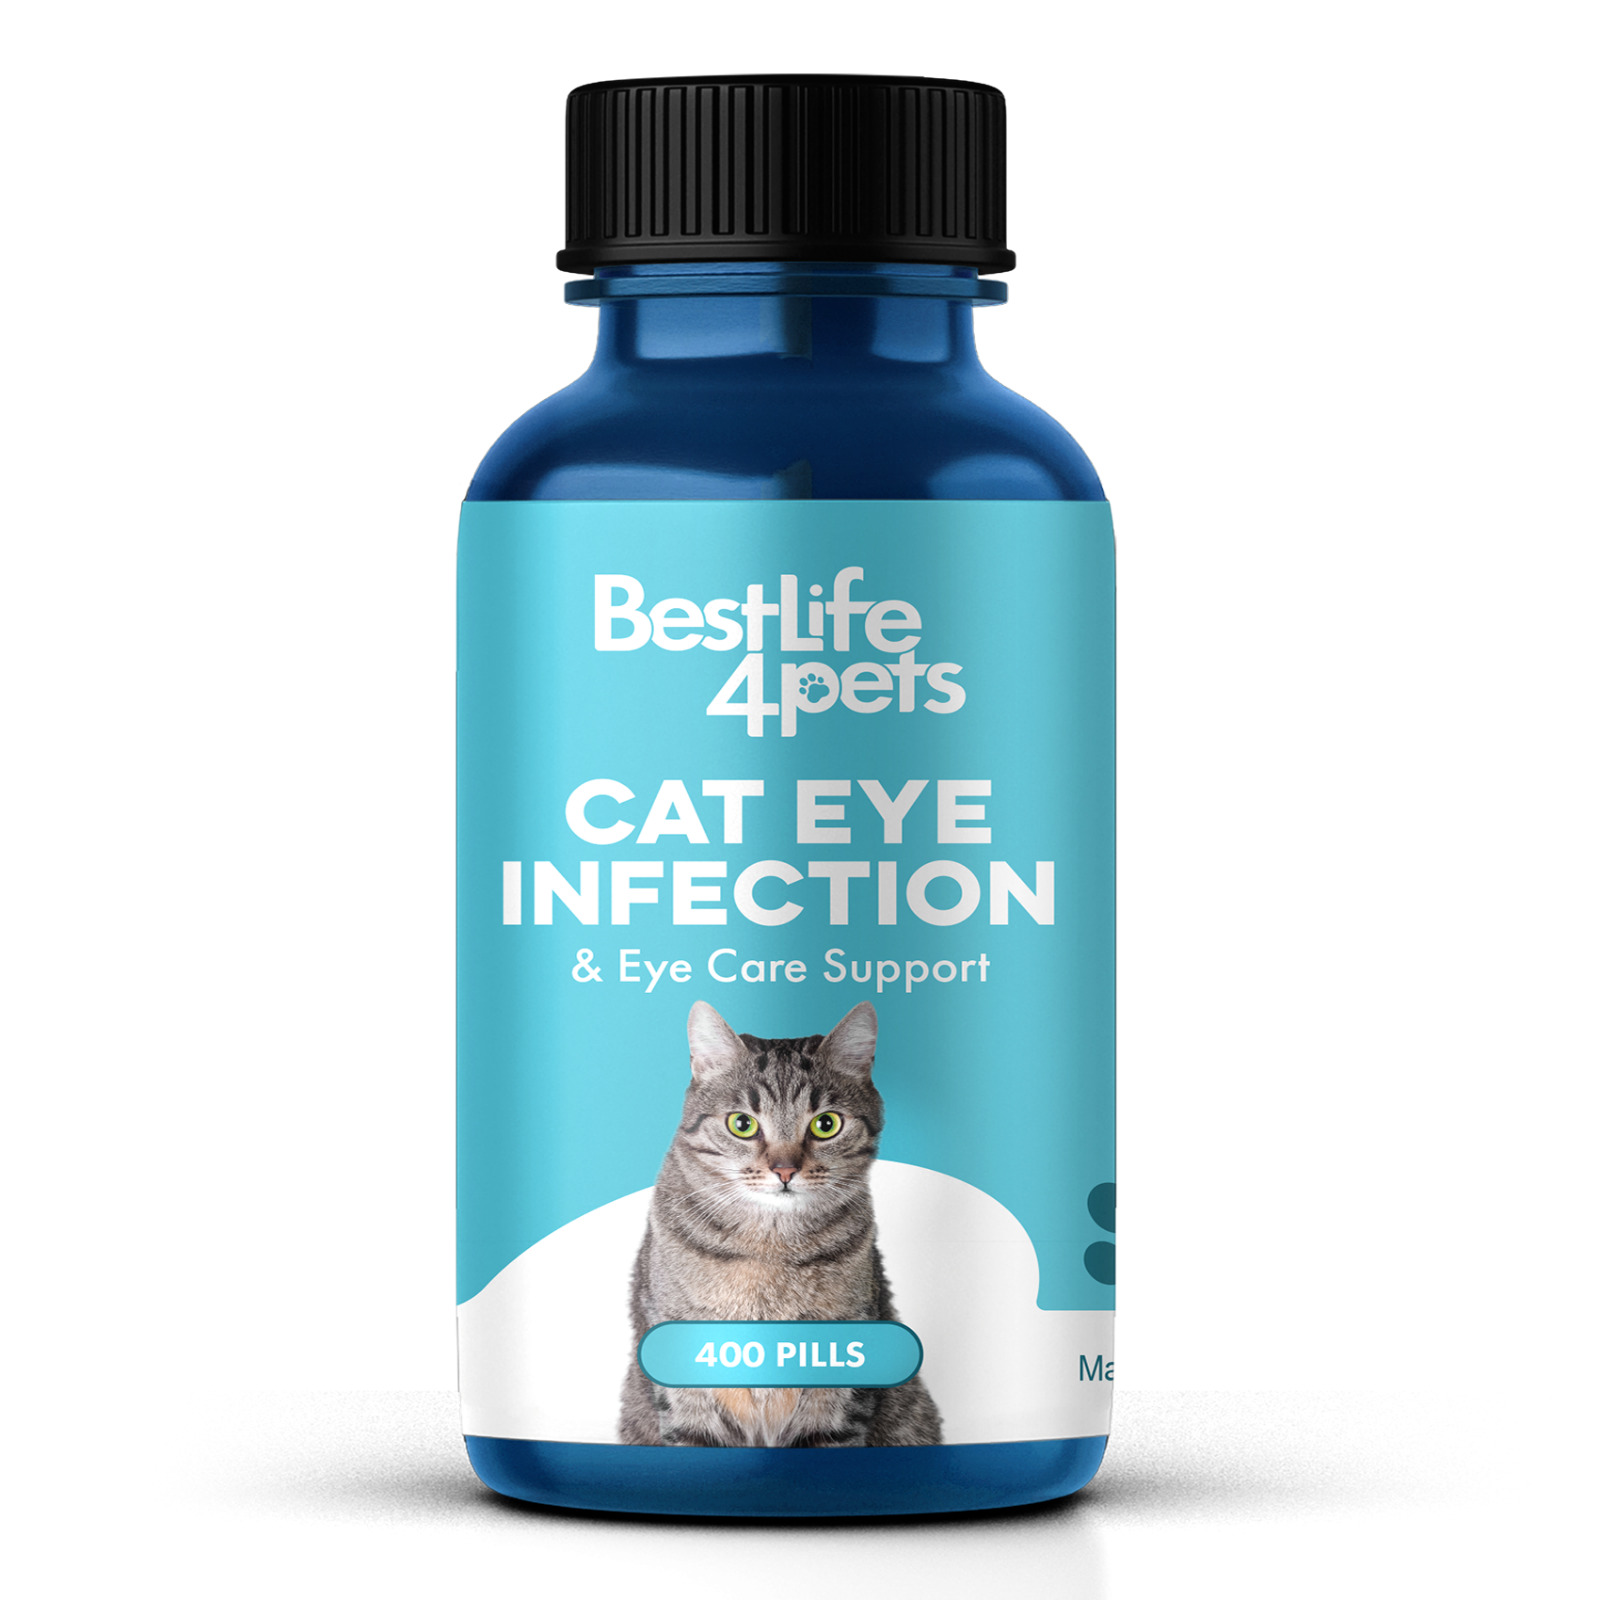 Eye Care & Vision Support Feline Eye-Infection Relief Remedy